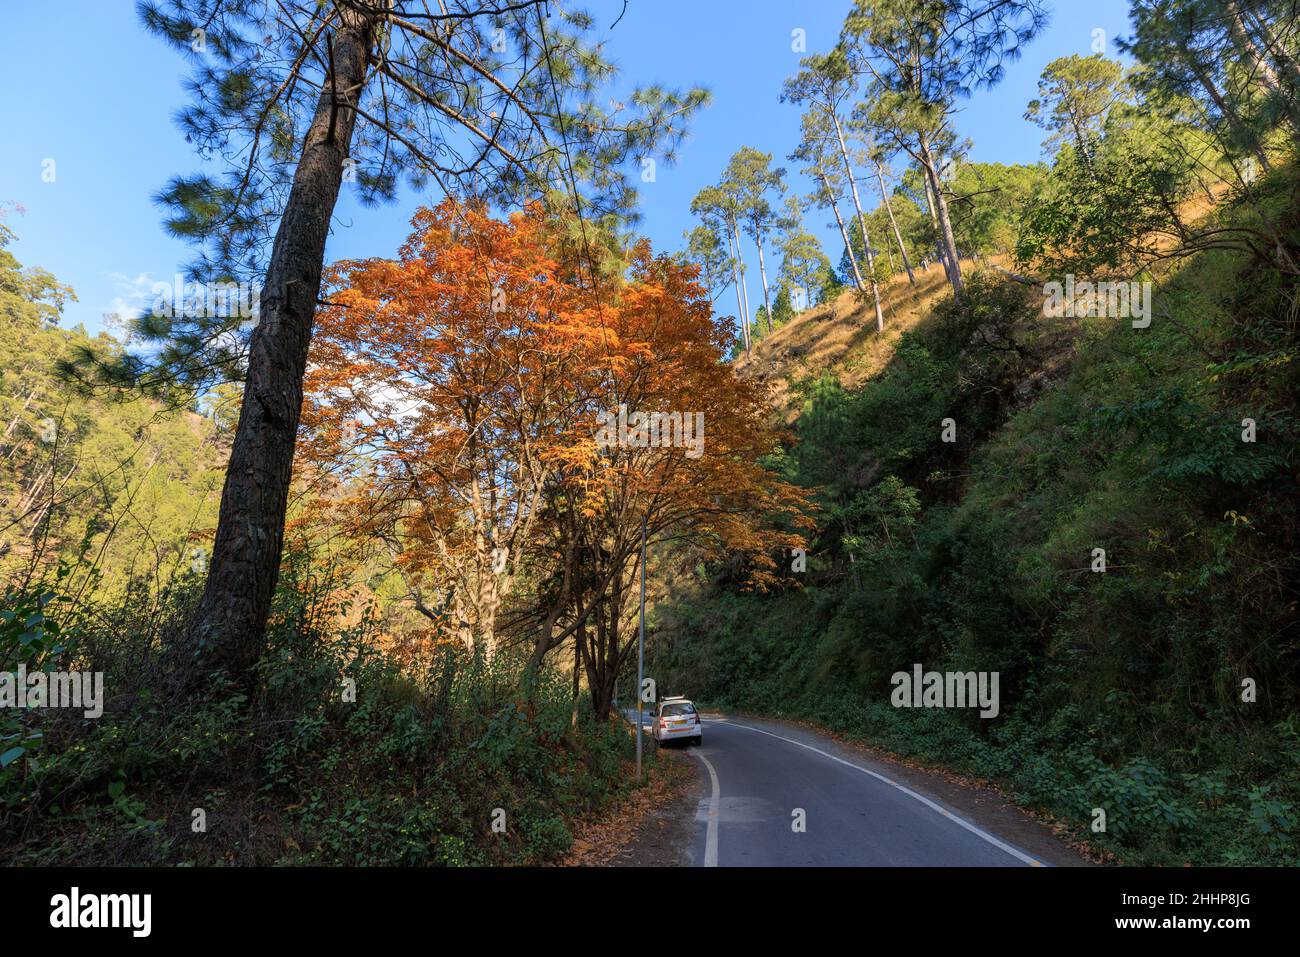 Winding Himalayan road and a Chestnut tree in its autumn colours Stock Photo